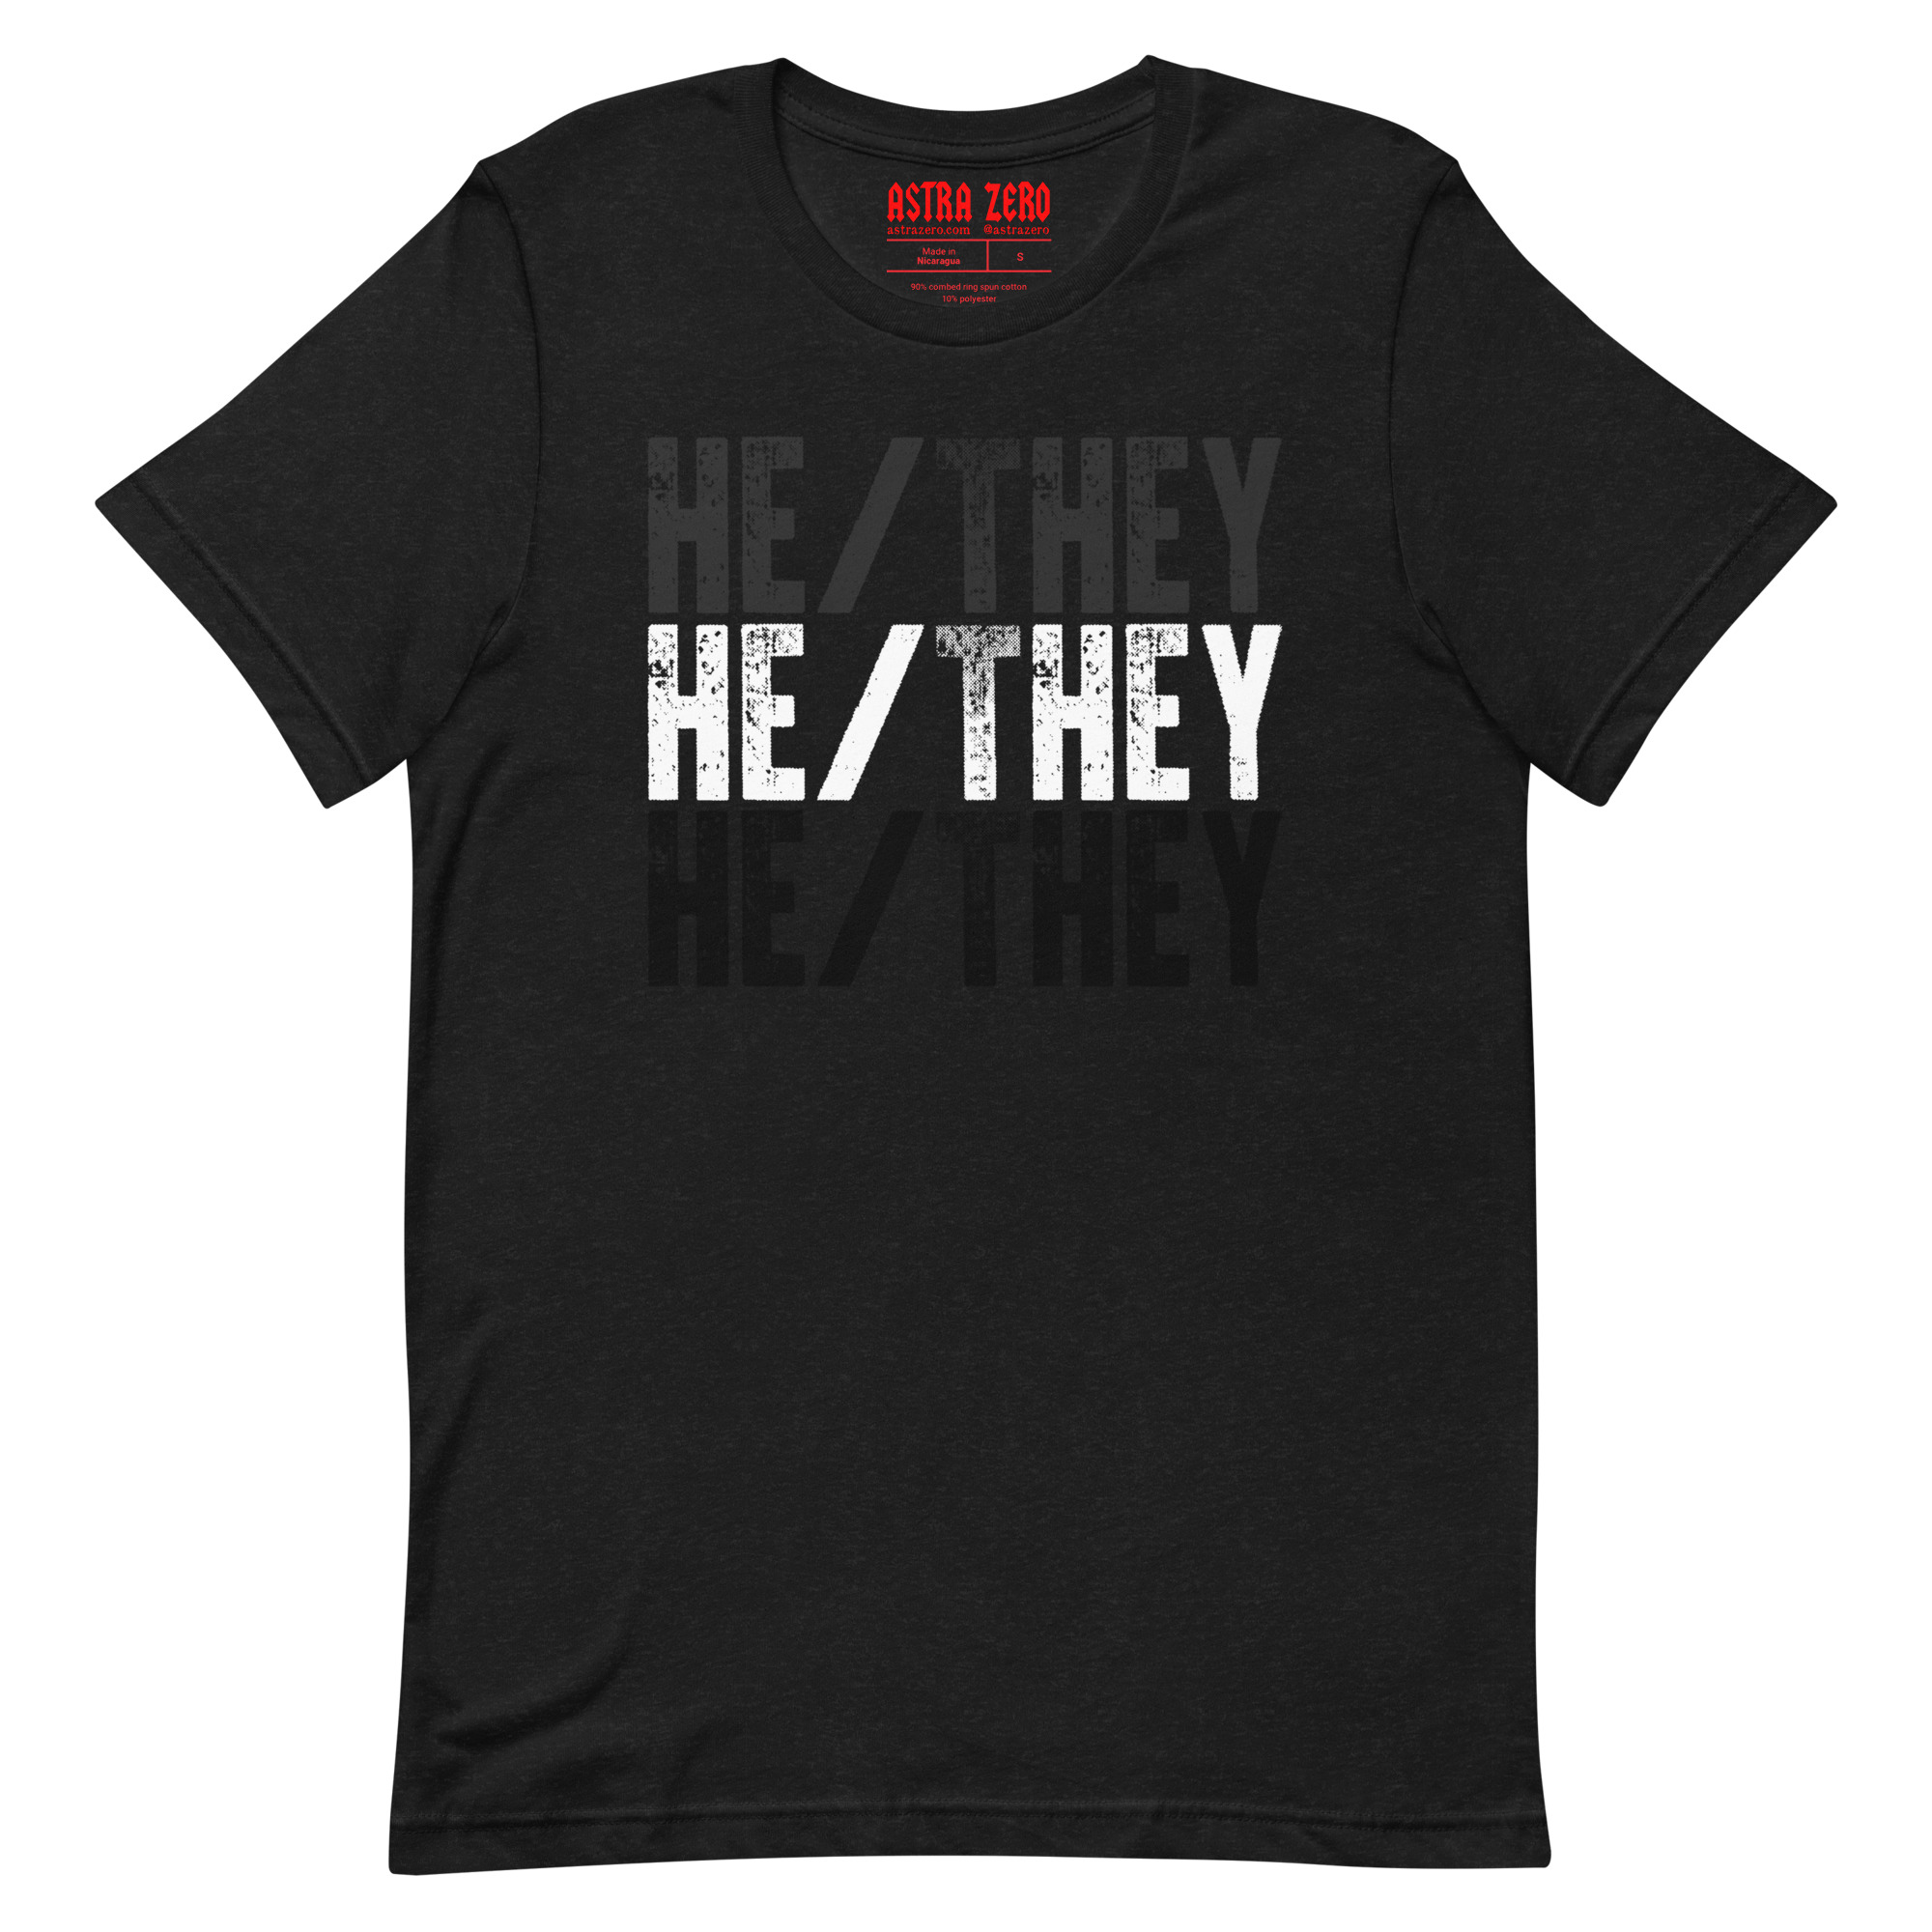 Featured image for “HE / THEY - Unisex t-shirt”